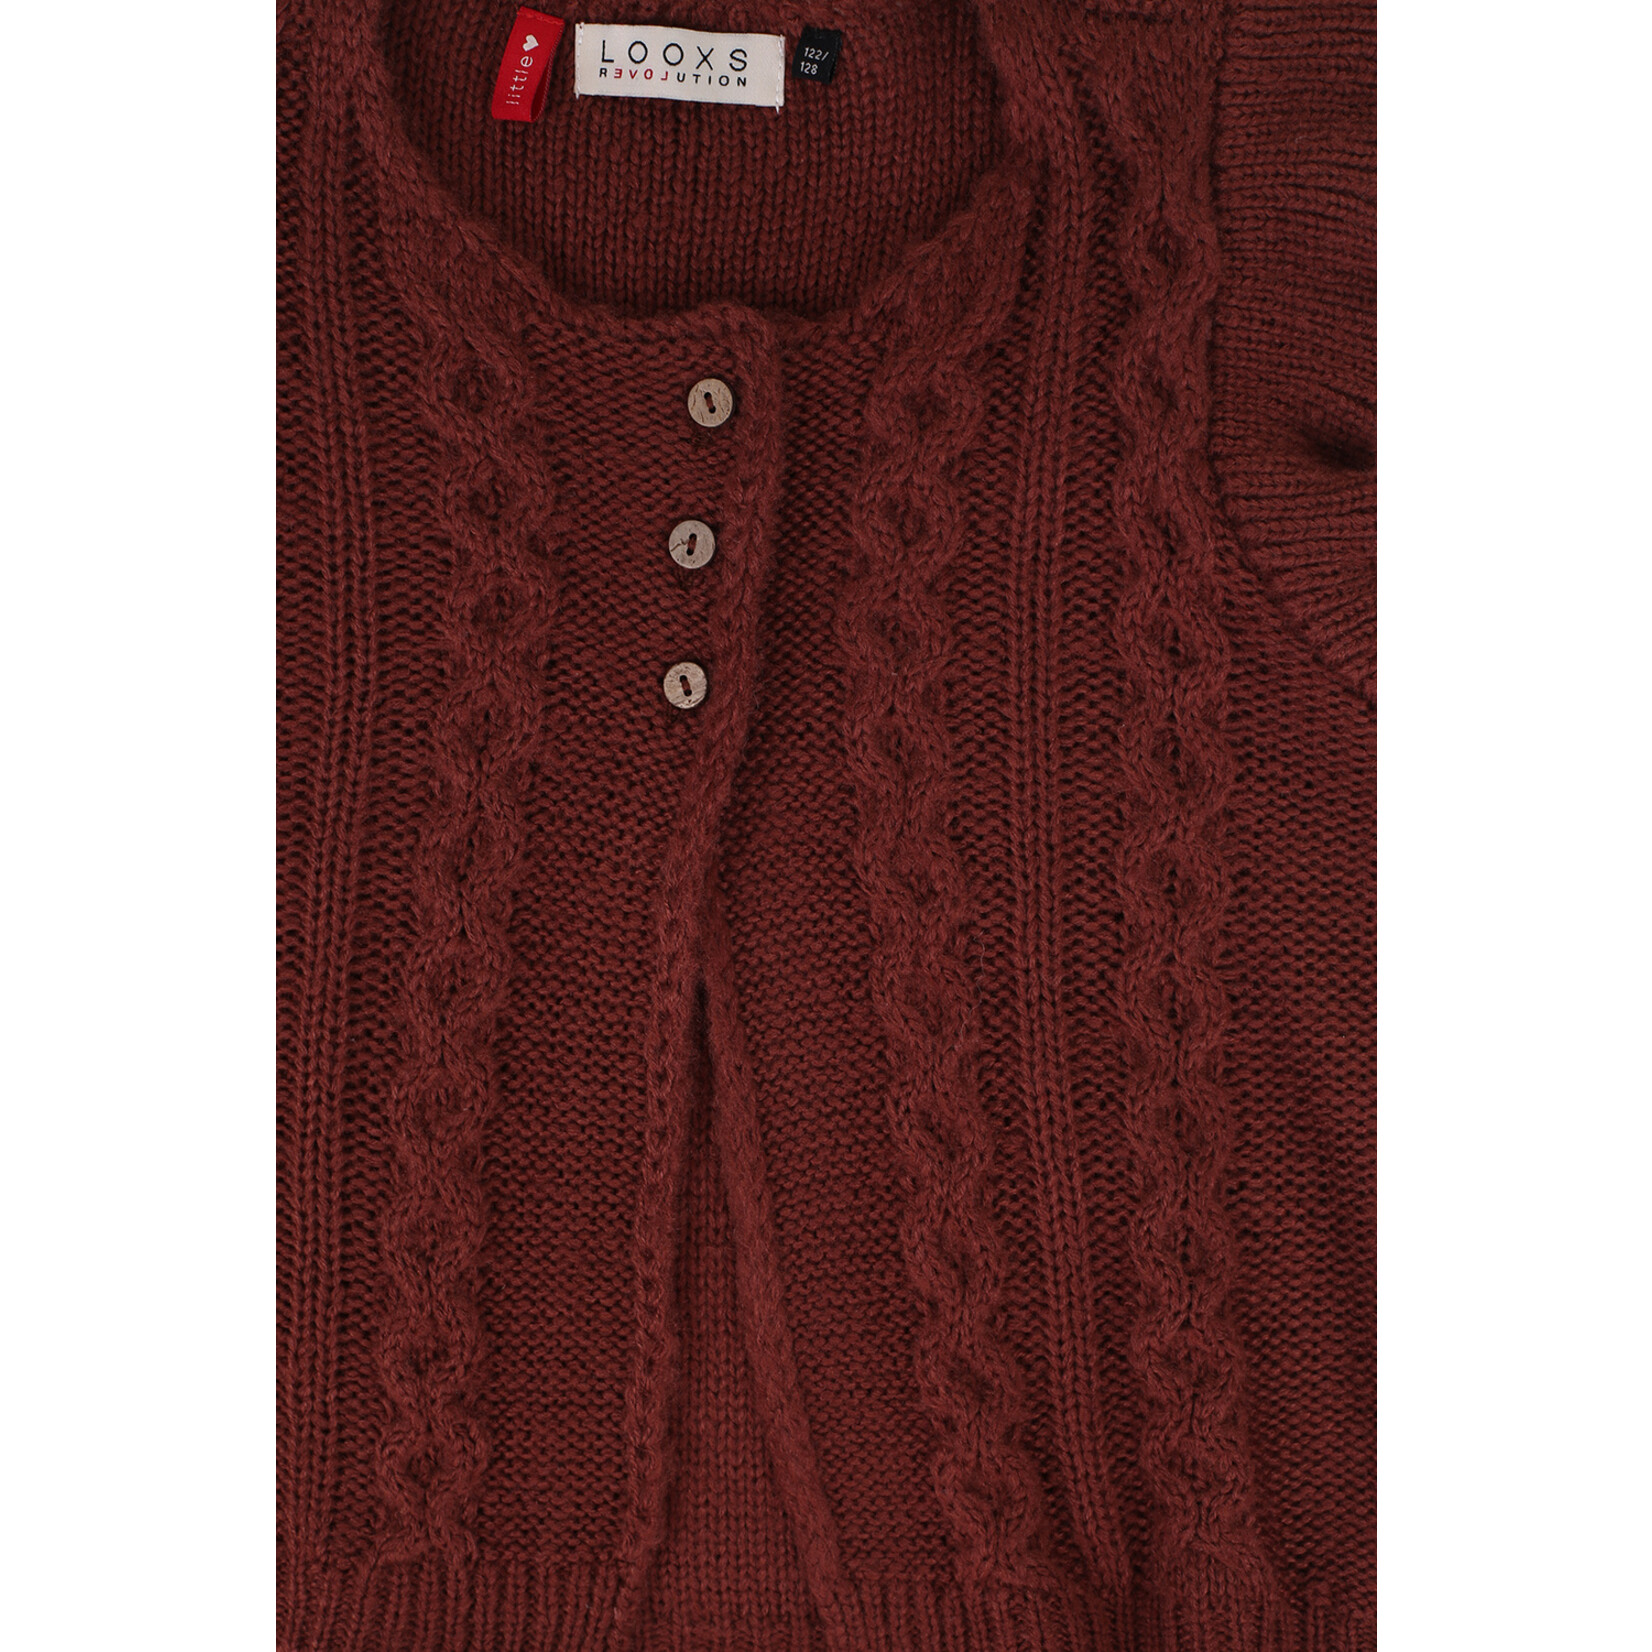 LOOXS Little Little knitted gilet Red Wine